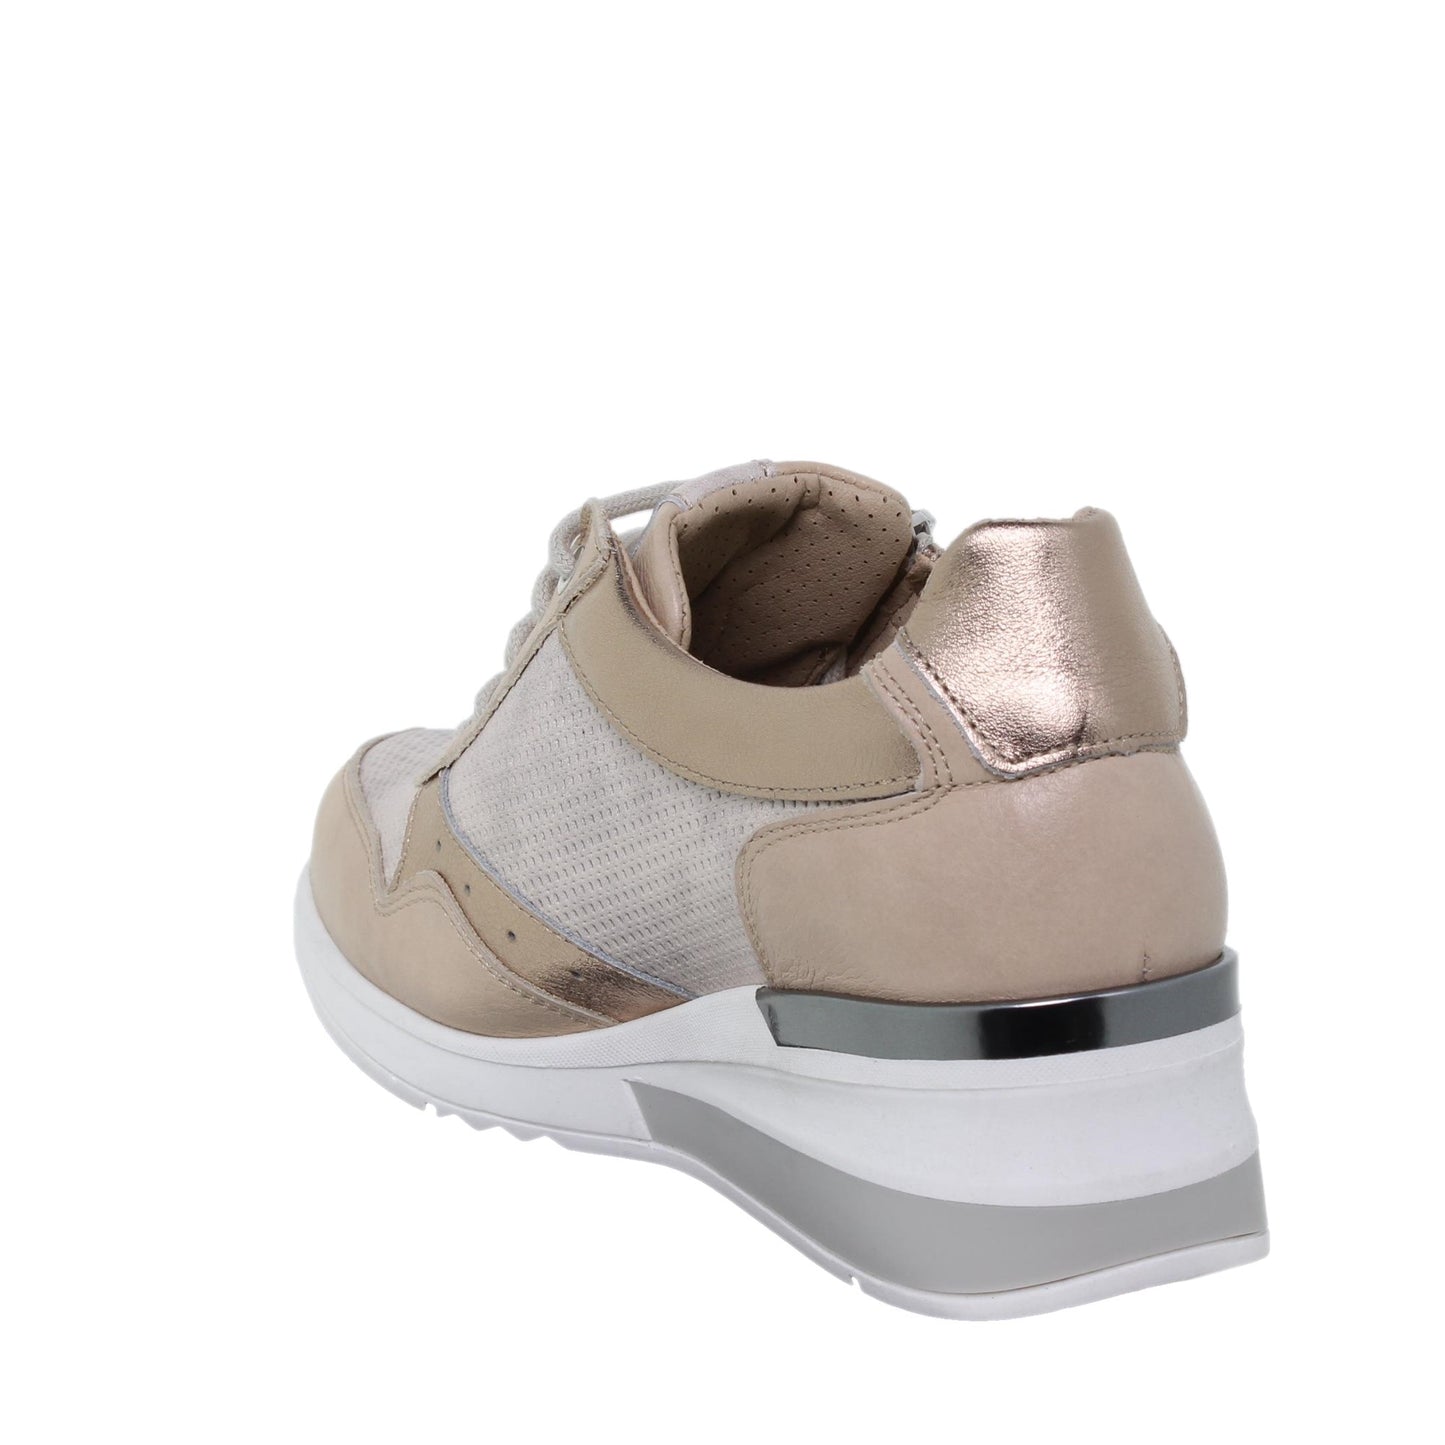 Sneaker mujer piel Taupe Verónica